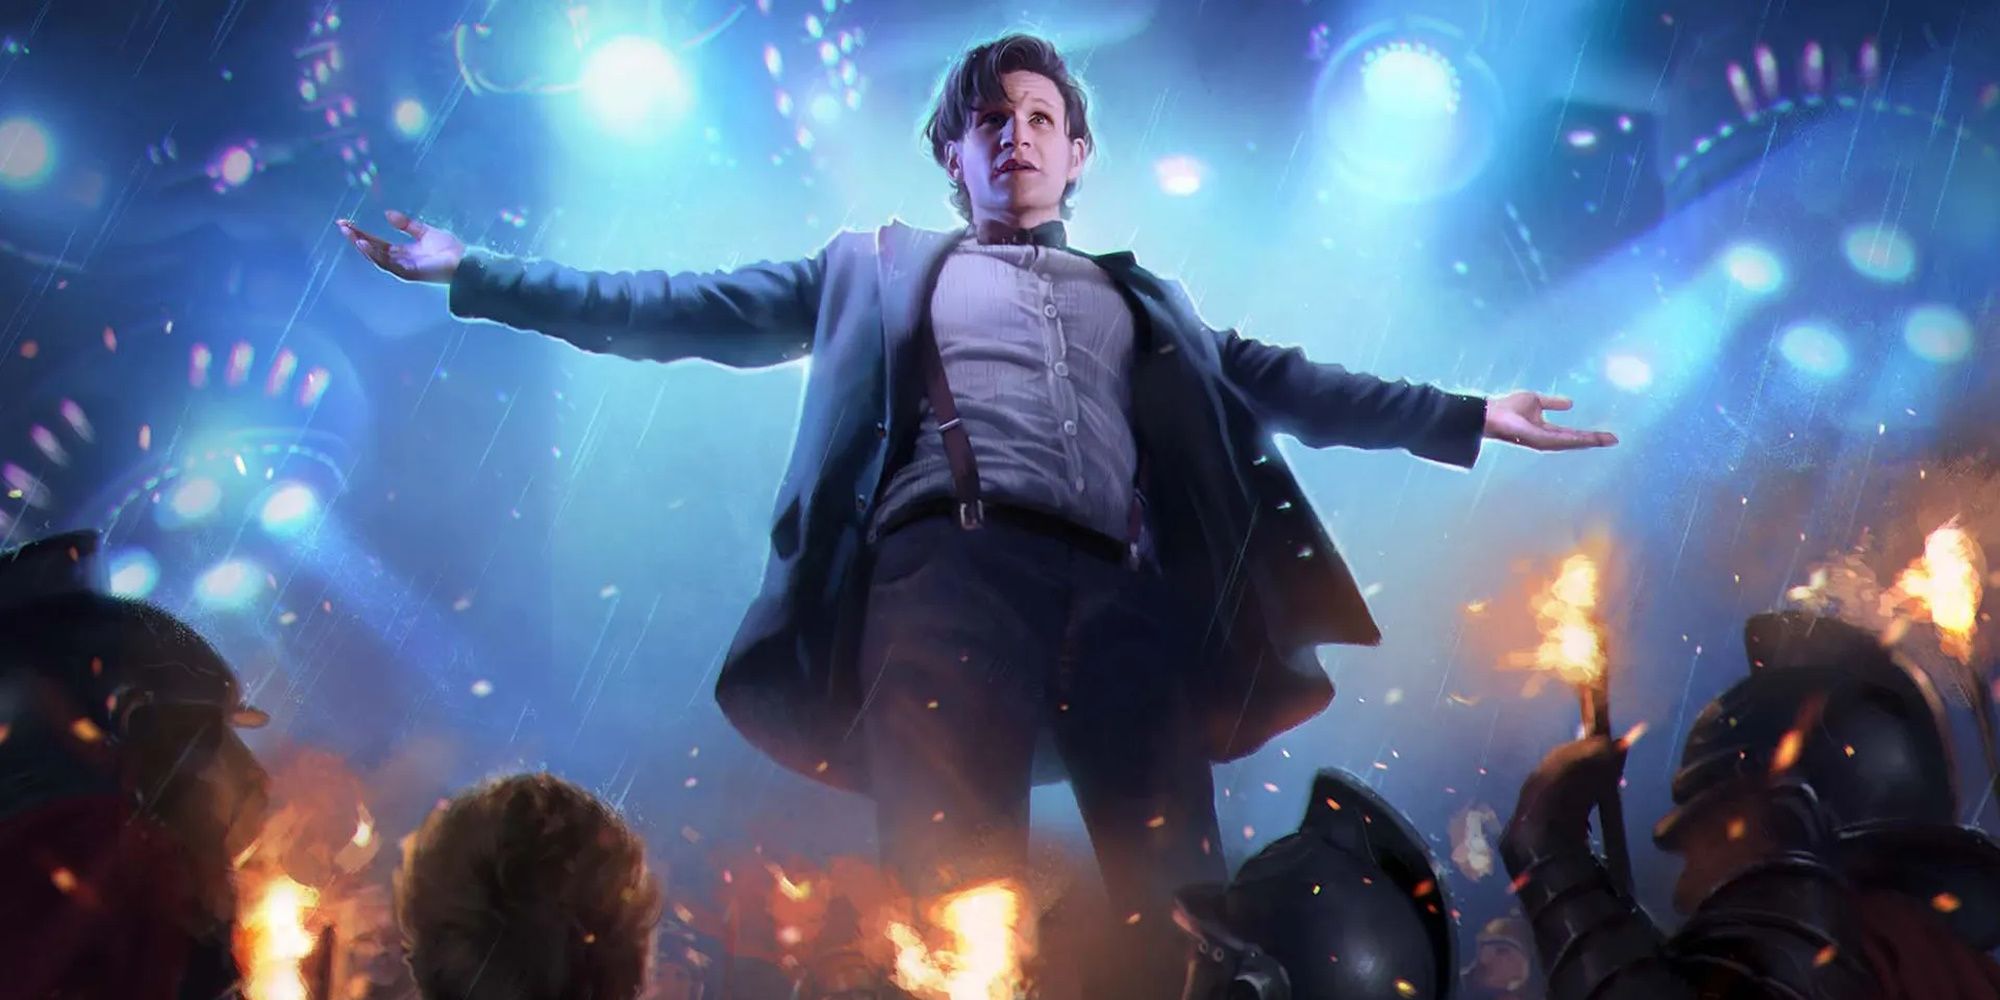 Magic: The Gathering’s Doctor Who Commander Decks Launch October 13